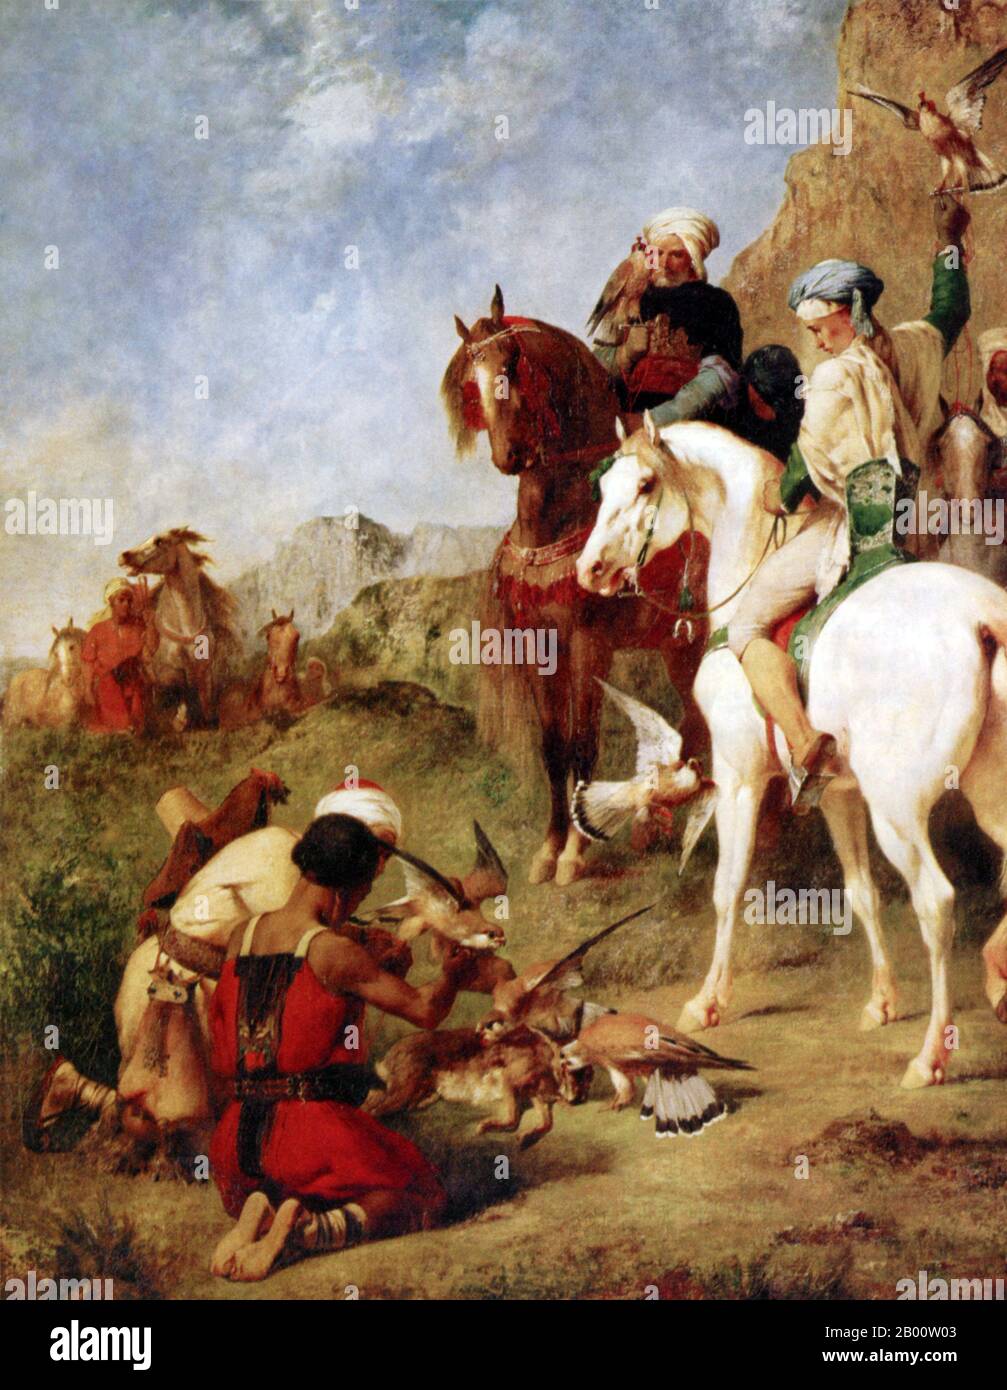 Algeria/Maghreb: ‘The Falconer’. Oil on canvas painting by Eugene Fromentin (1820-1876), which also shows Algerian locals on Barb horses, 1863.  The sport of falconry was introduced to Algeria and the Maghreb by the Arabs over 1,000 years ago and was a favorite pastime of royalty and nobility. During the period of Arab expansion into North Africa, cavalry was often mounted on small, agile horses called ‘Berbers’, or ‘Barbs’. Stock Photo